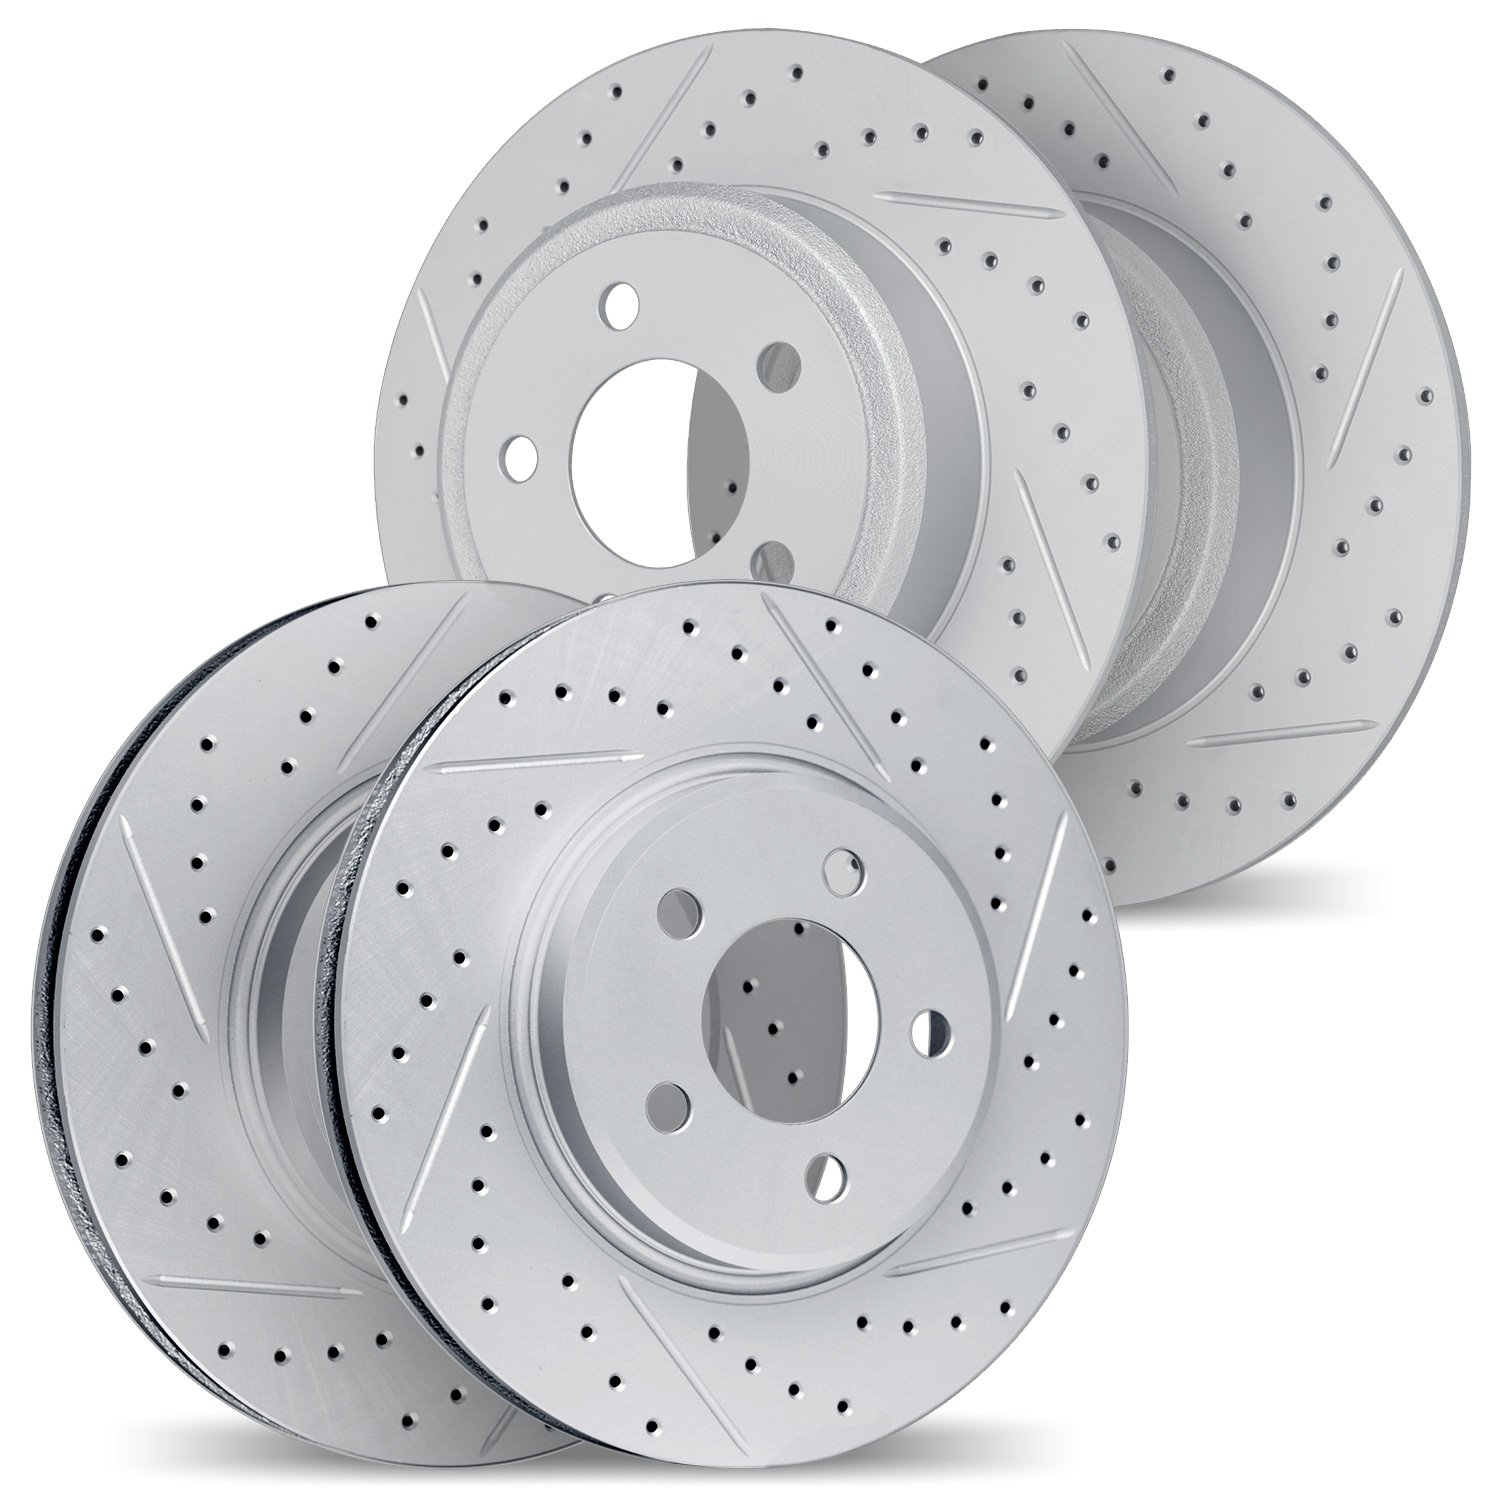 2004-59017 Geoperformance Drilled/Slotted Brake Rotors, 2003-2008 Acura/Honda, Position: Front and Rear